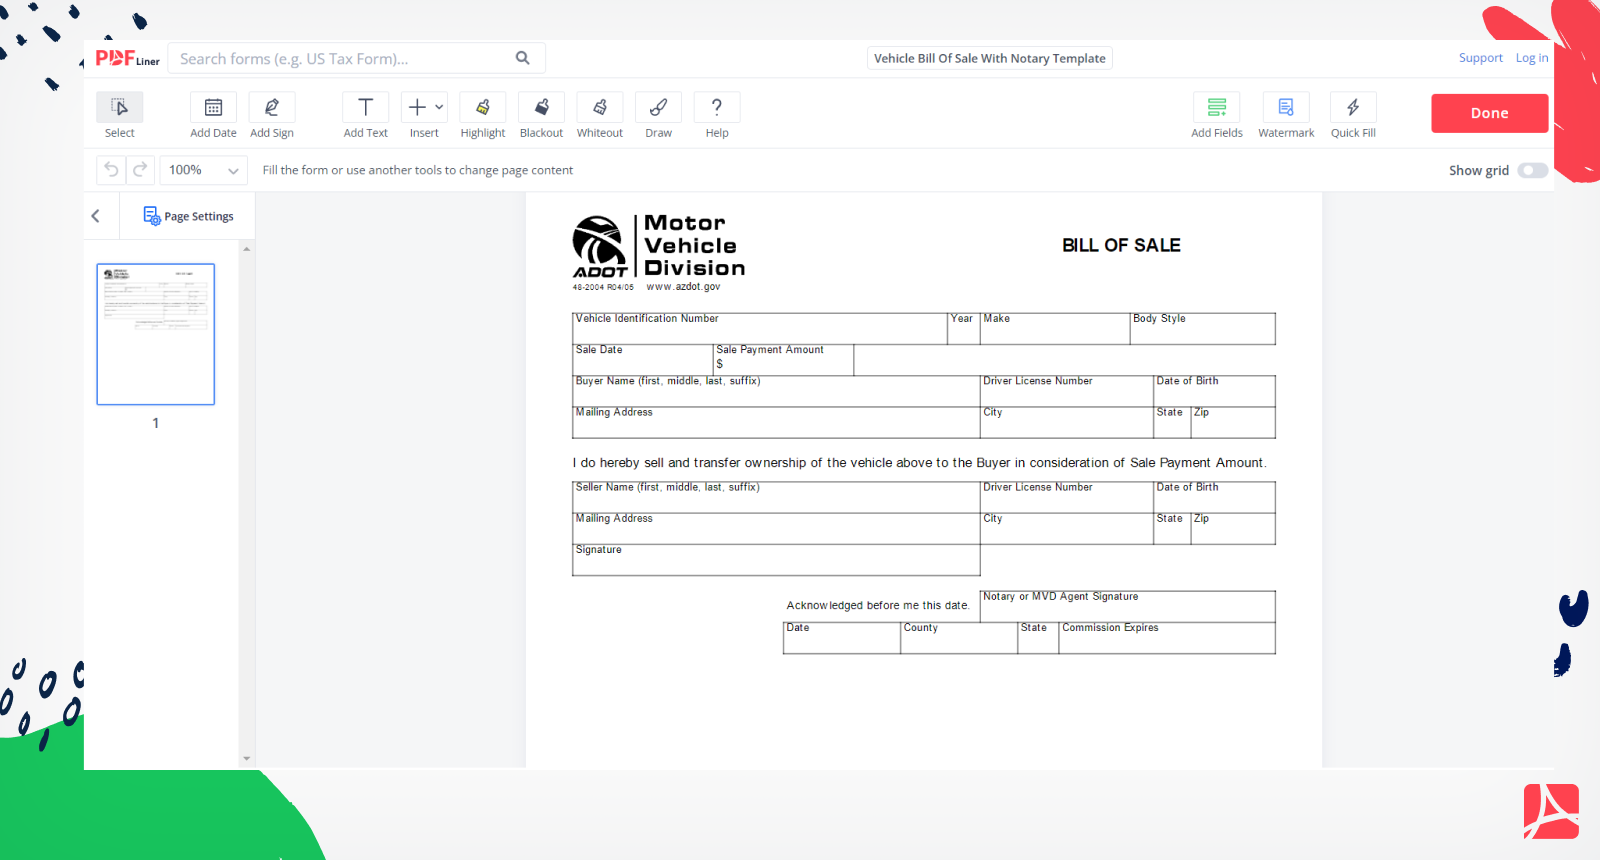 Vehicle Bill Of Sale With Notary Template Form Screenshot